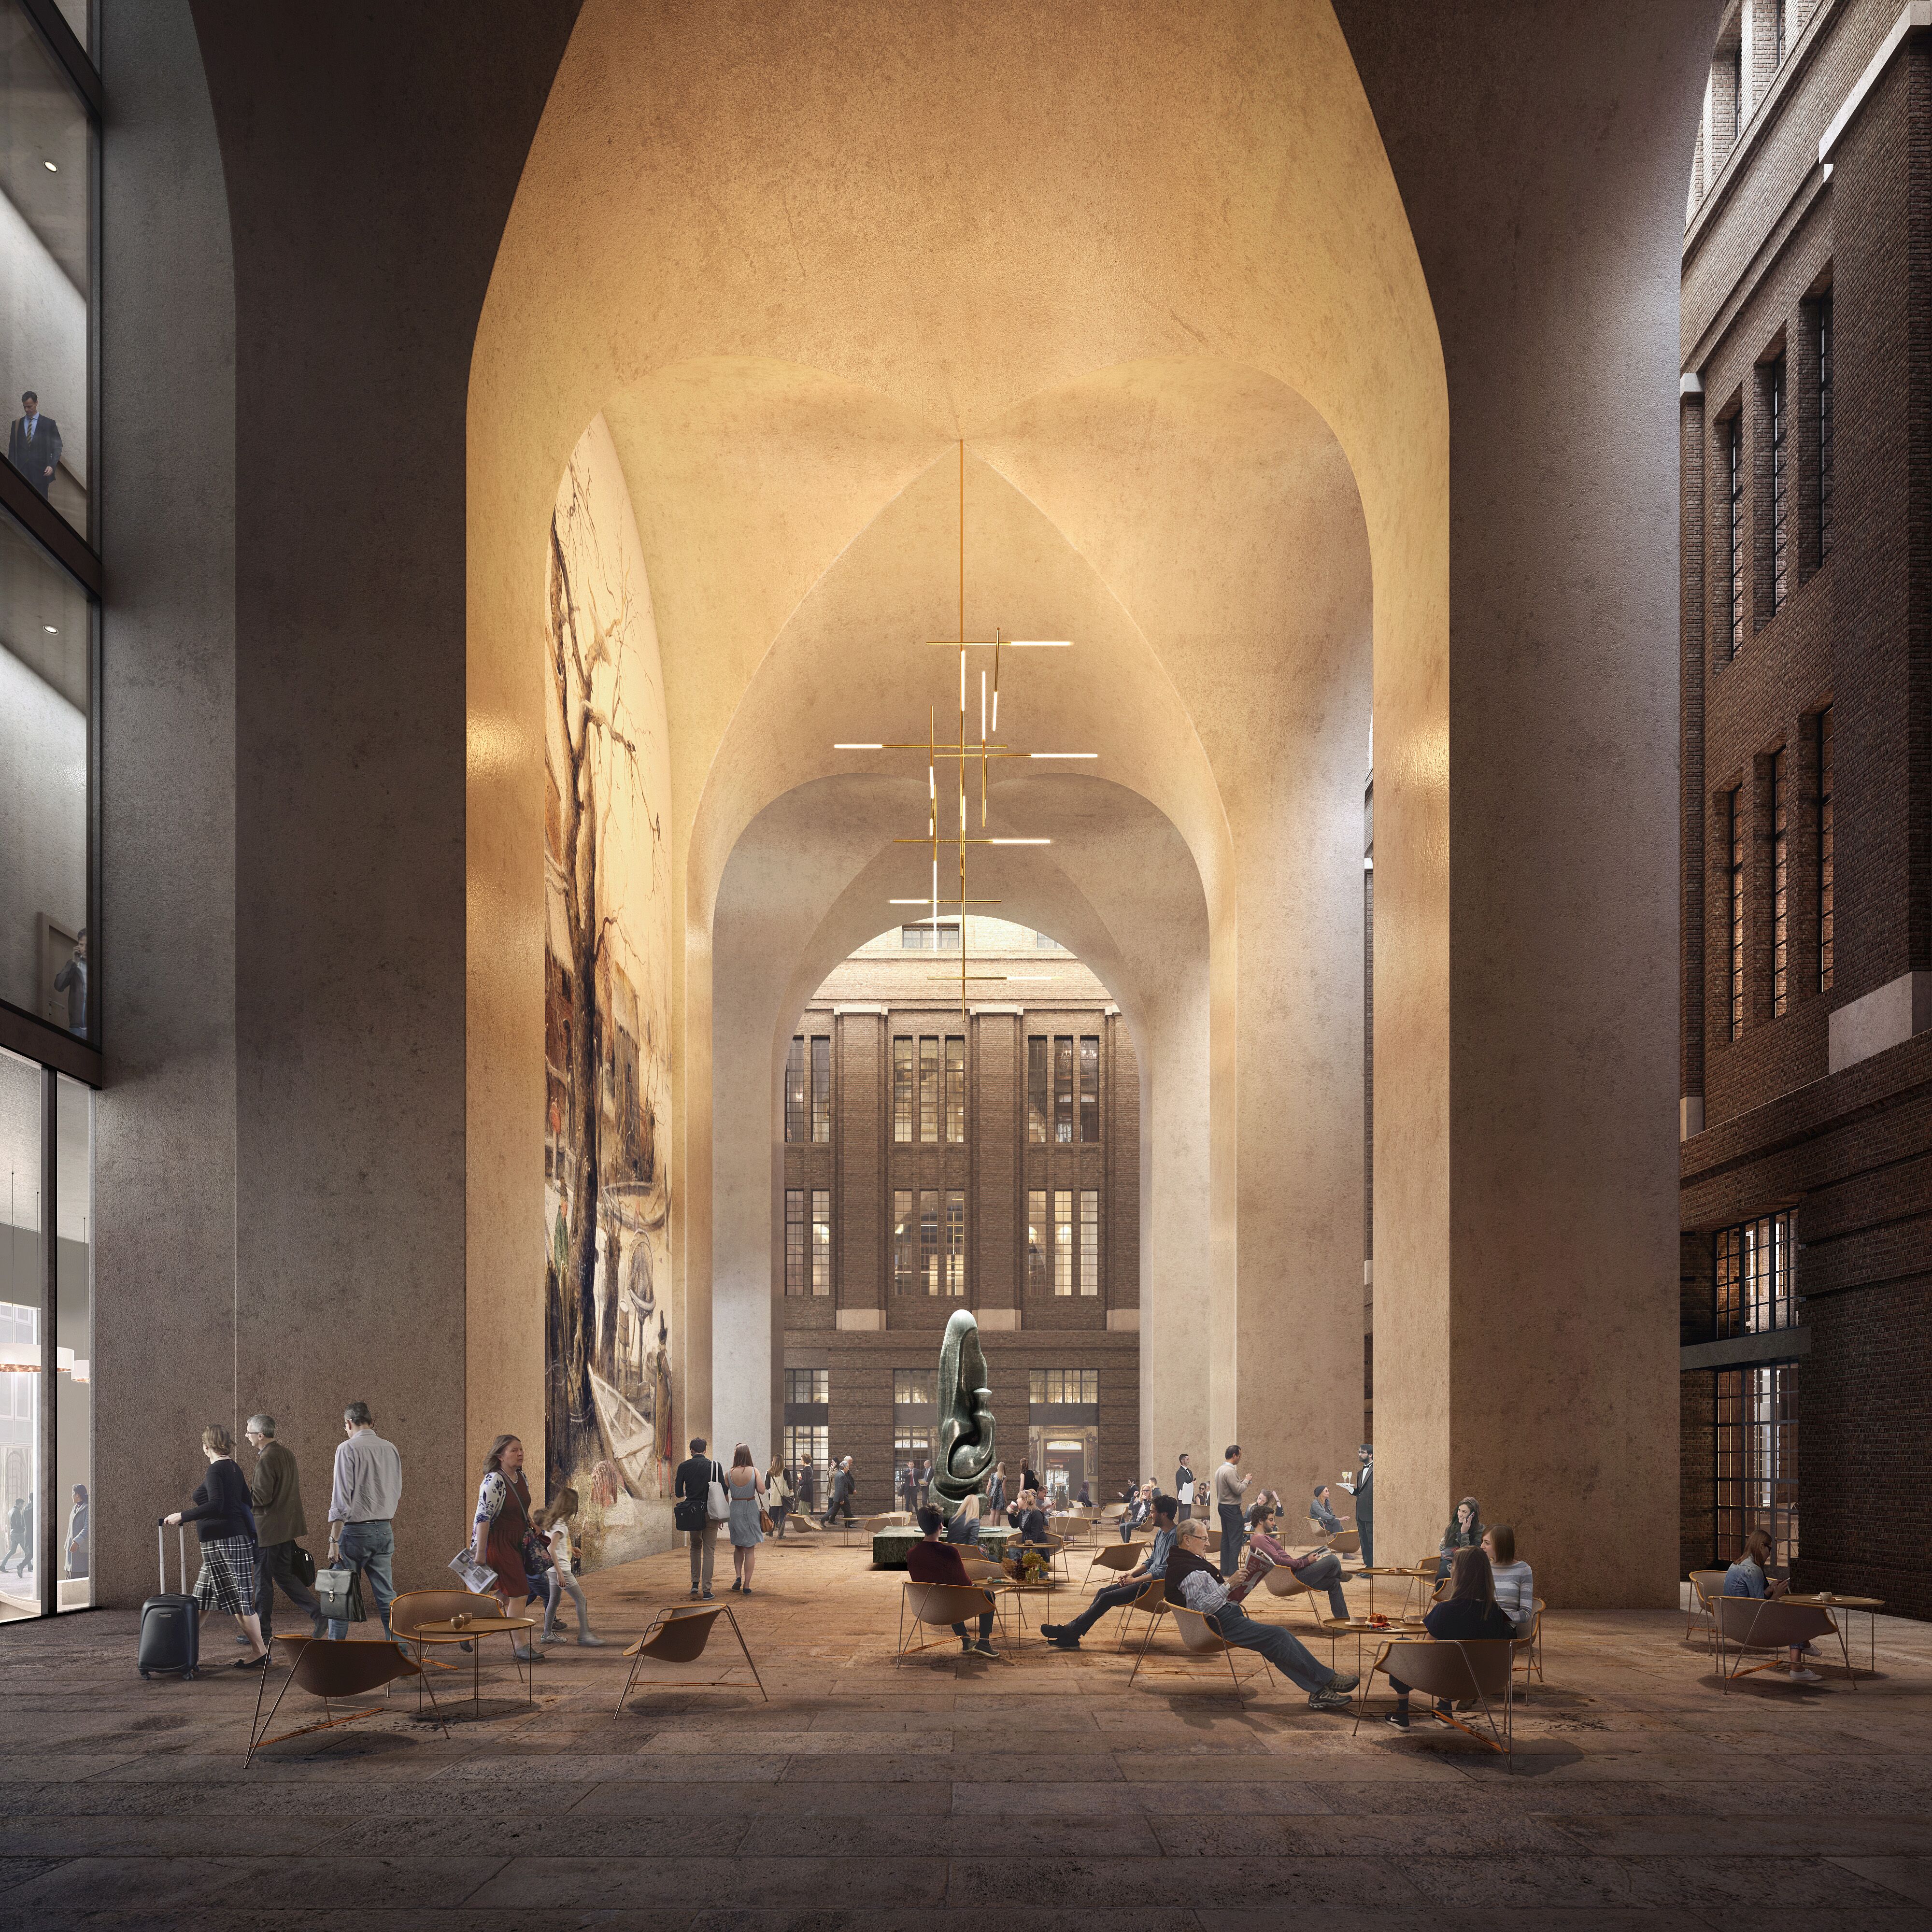 ODA New York has been tapped to redesign the historic post office in Rotterdam, Netherlands